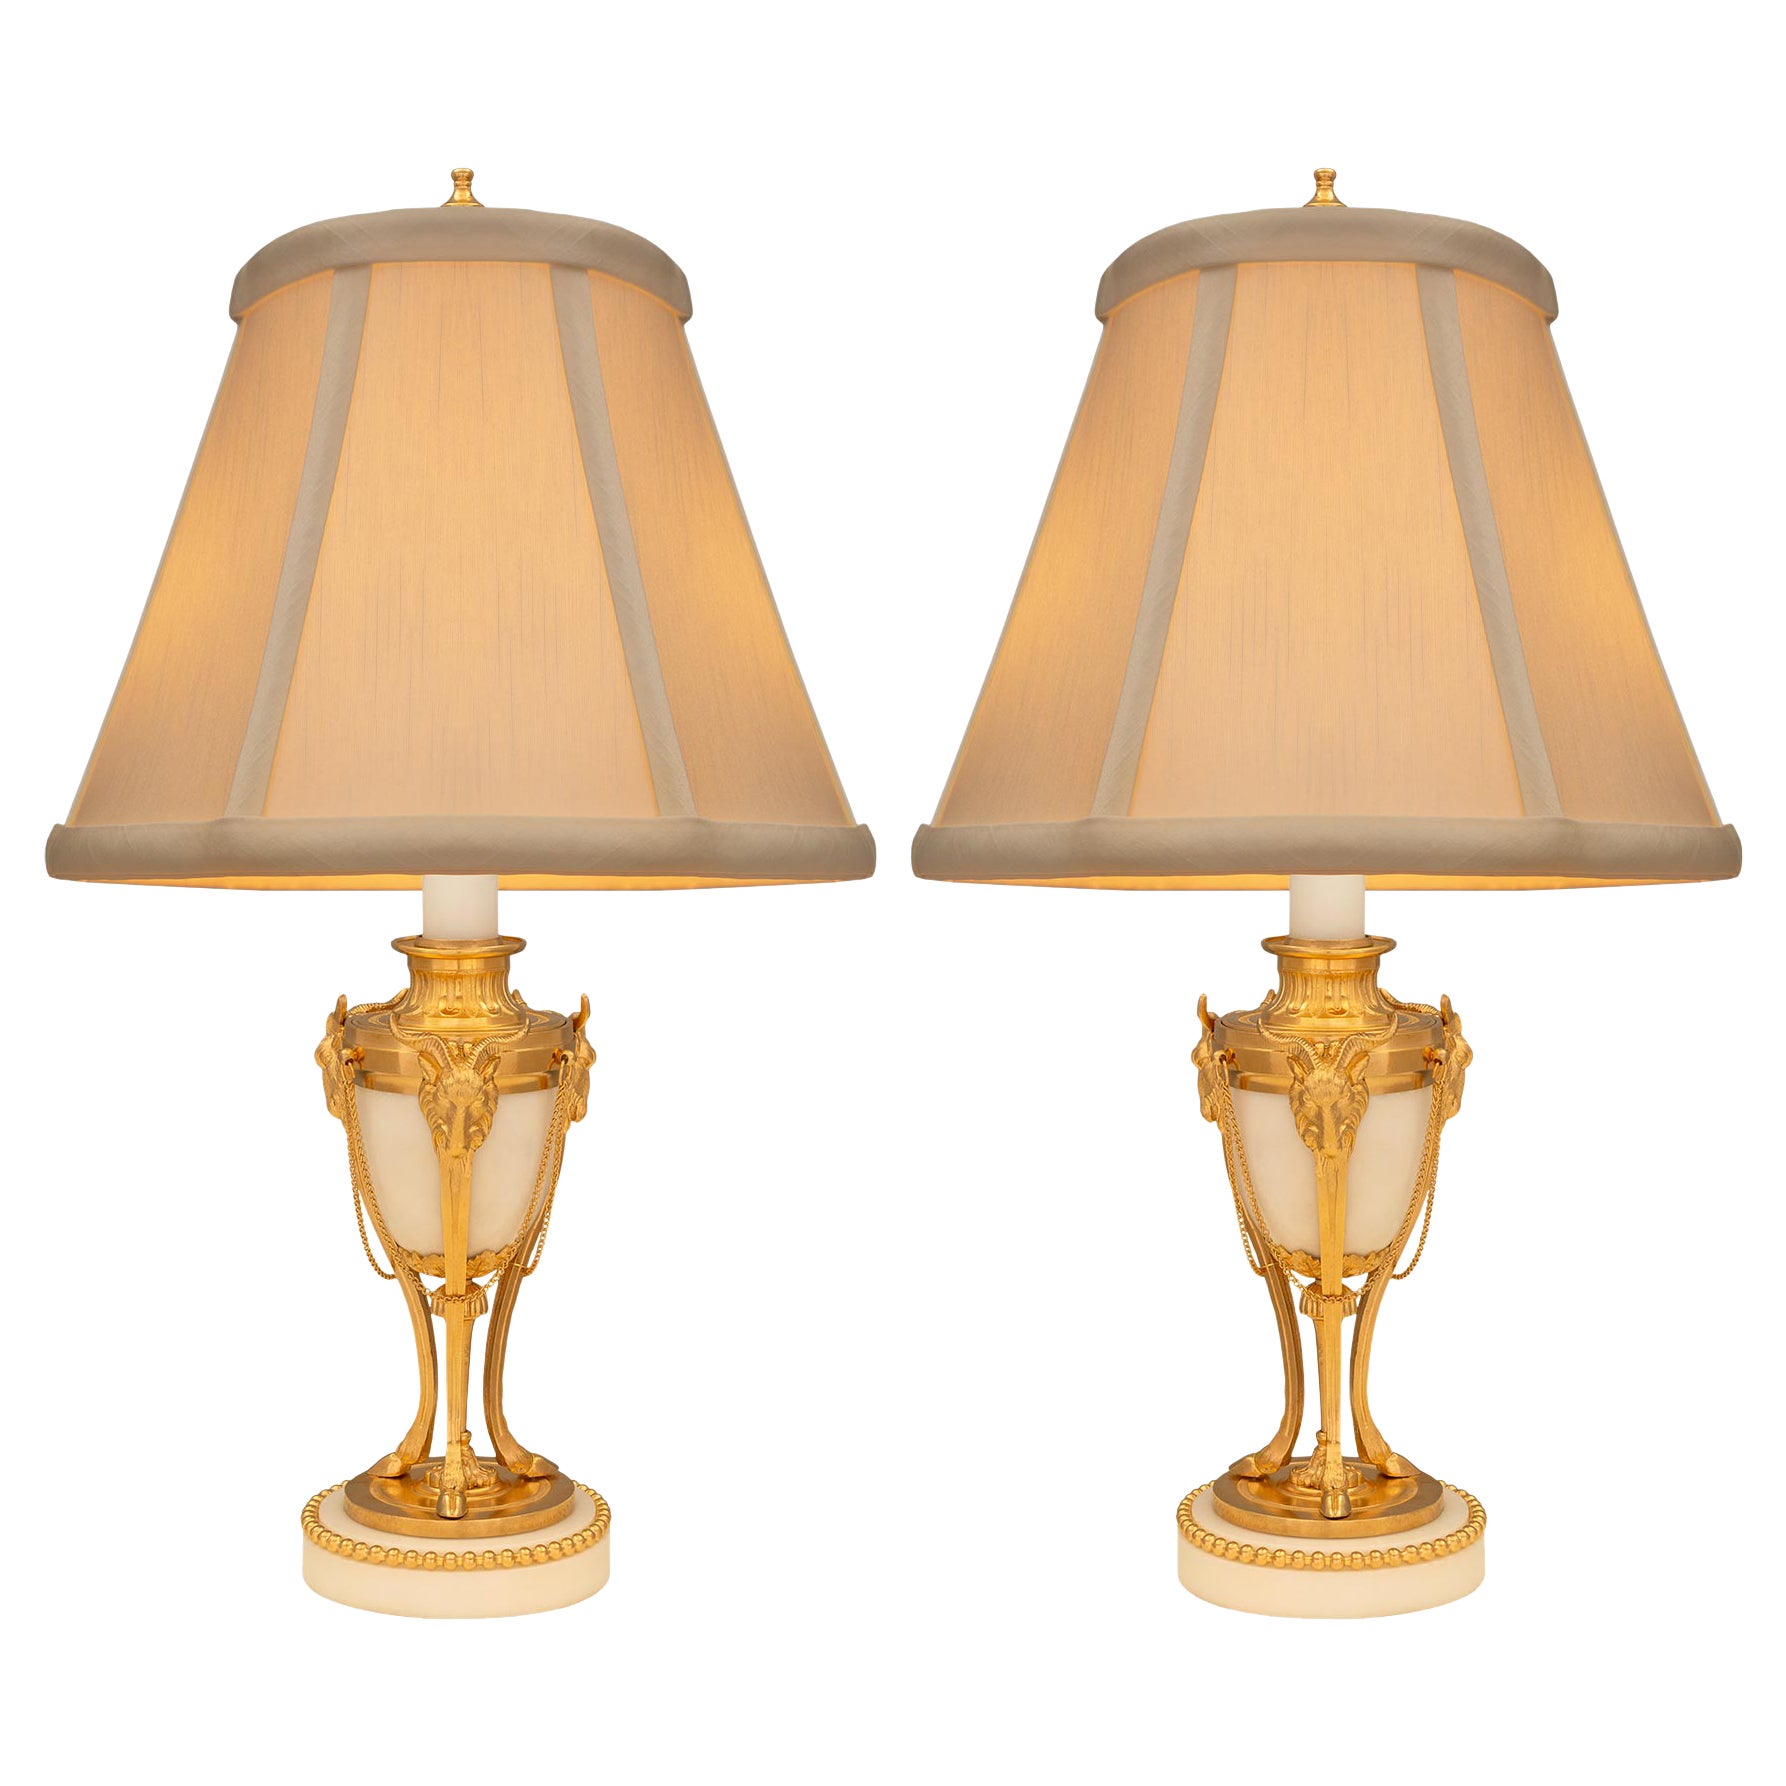 Pair of French 19th Century Louis XVI St. White Carrara Marble and Ormolu Lamps